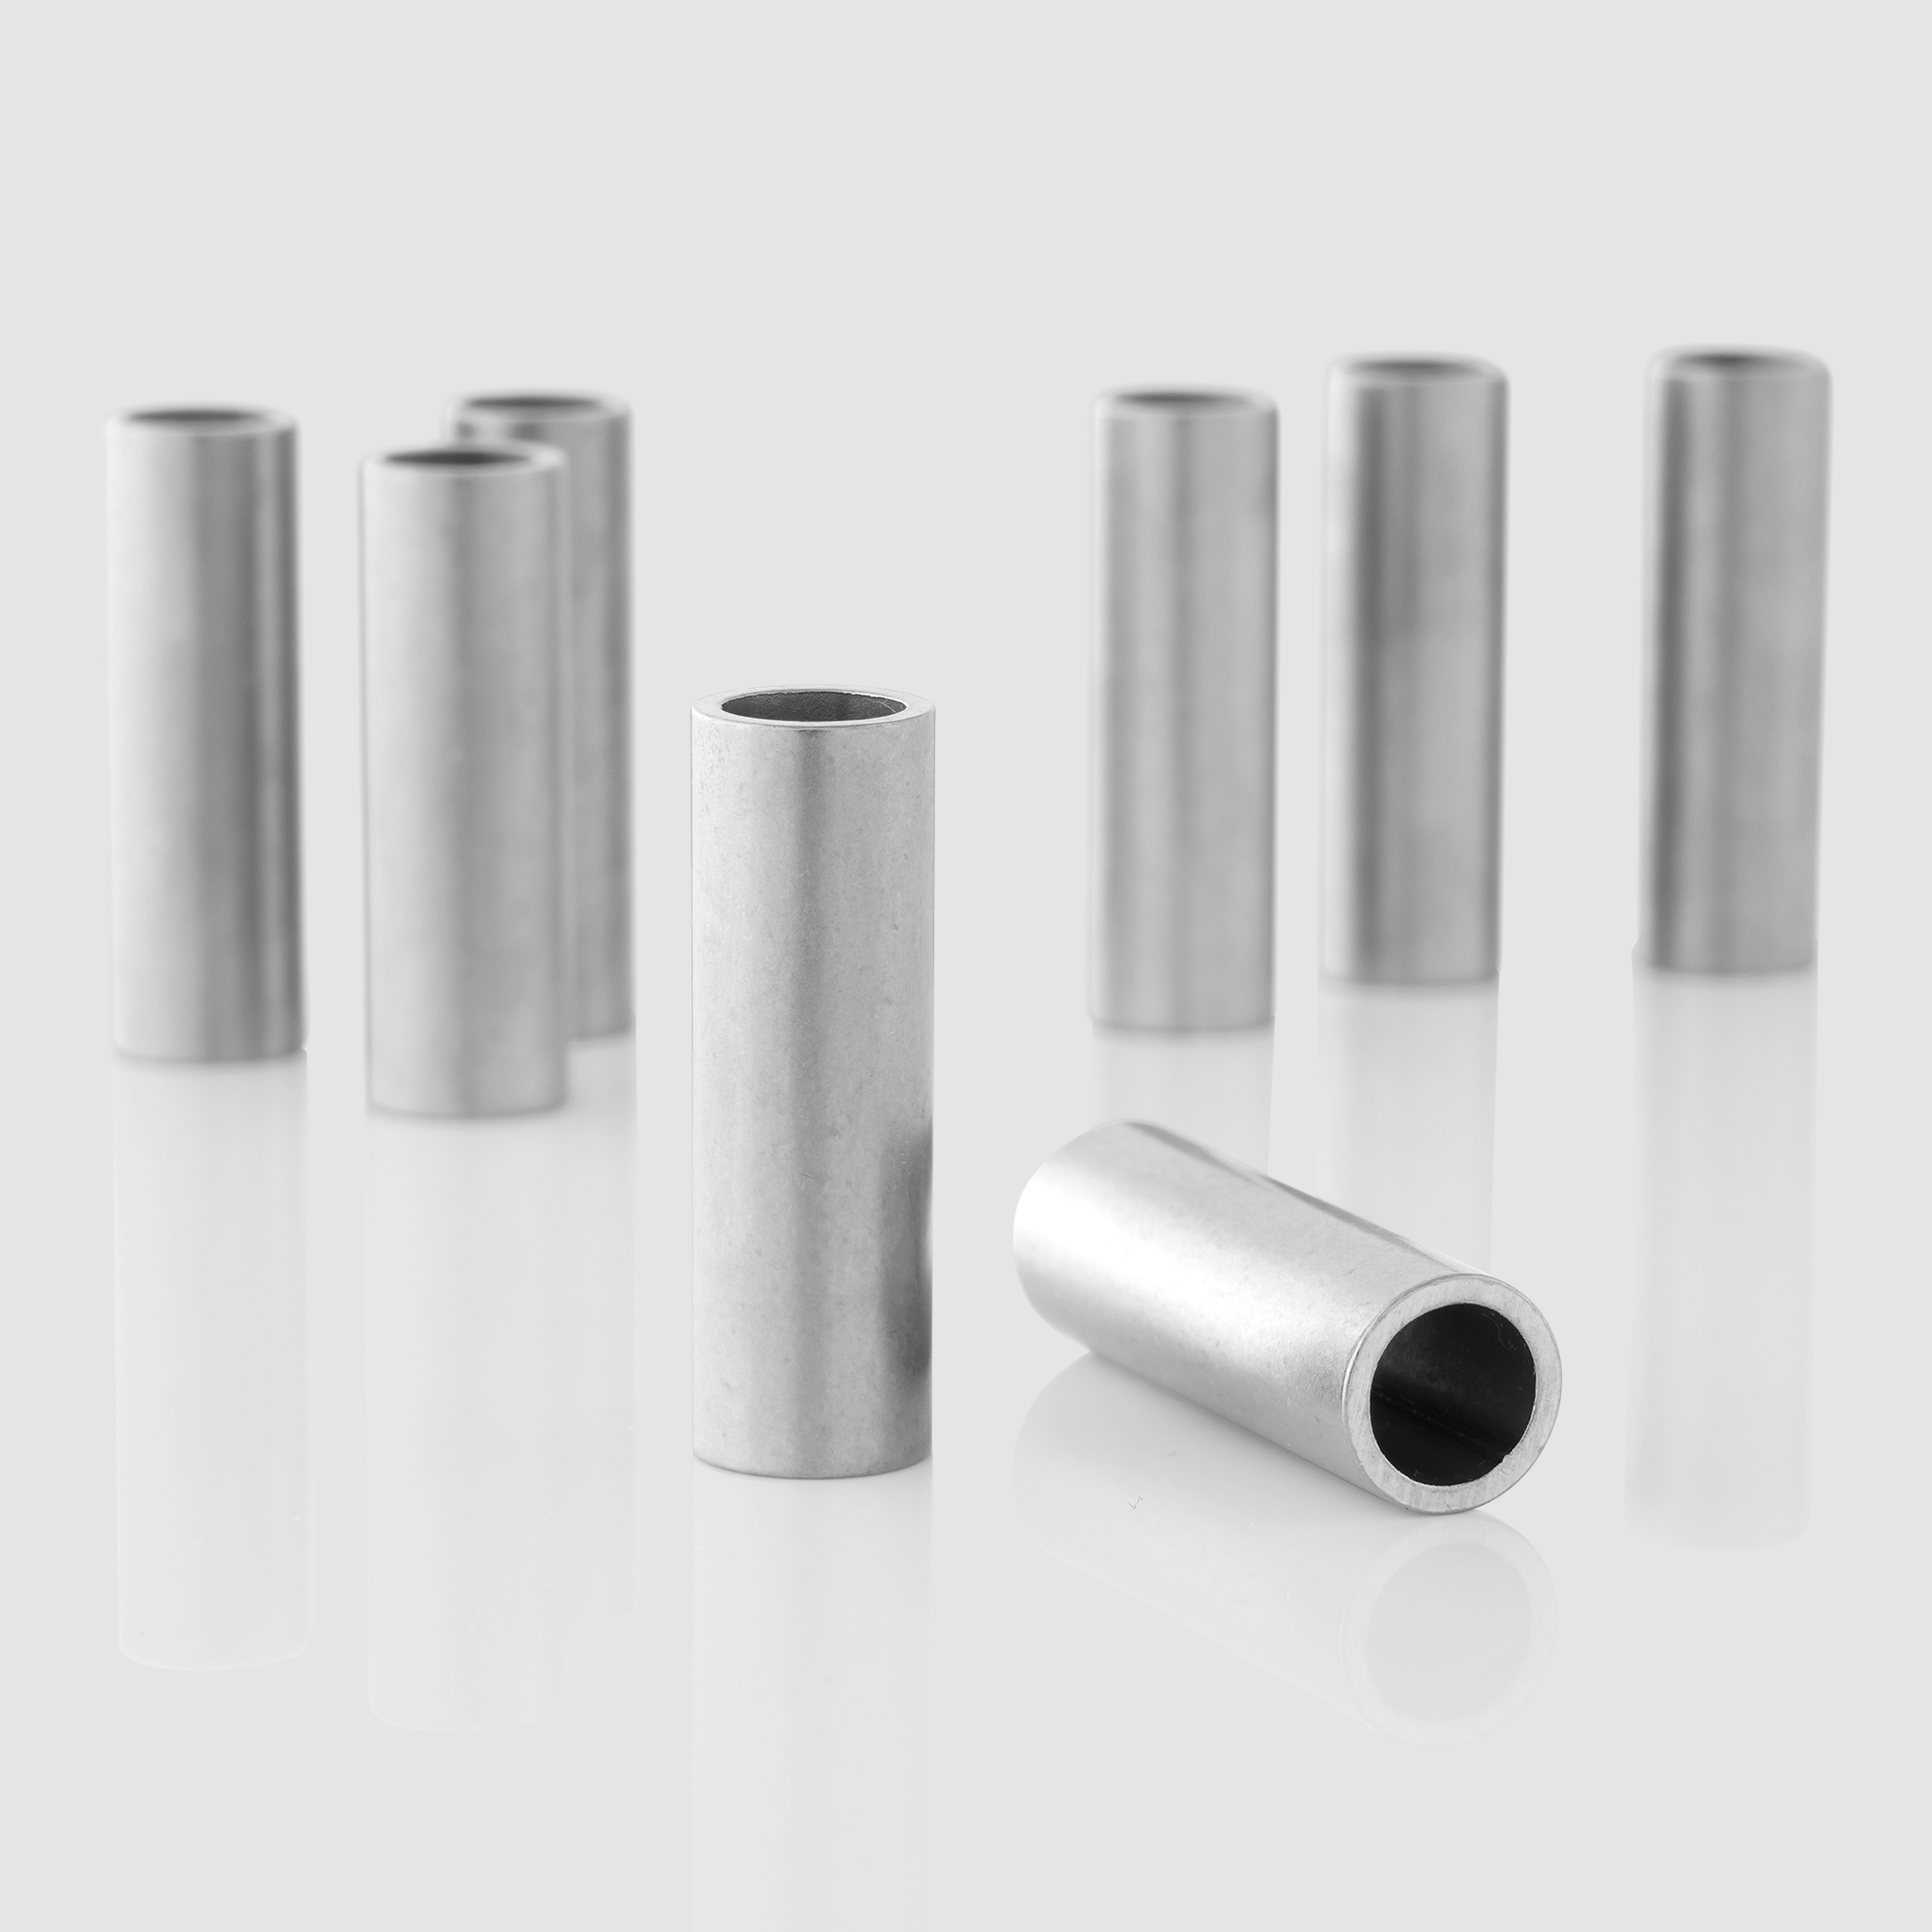 Stainless steel sleeves 8x6x1 mm (up to M6)